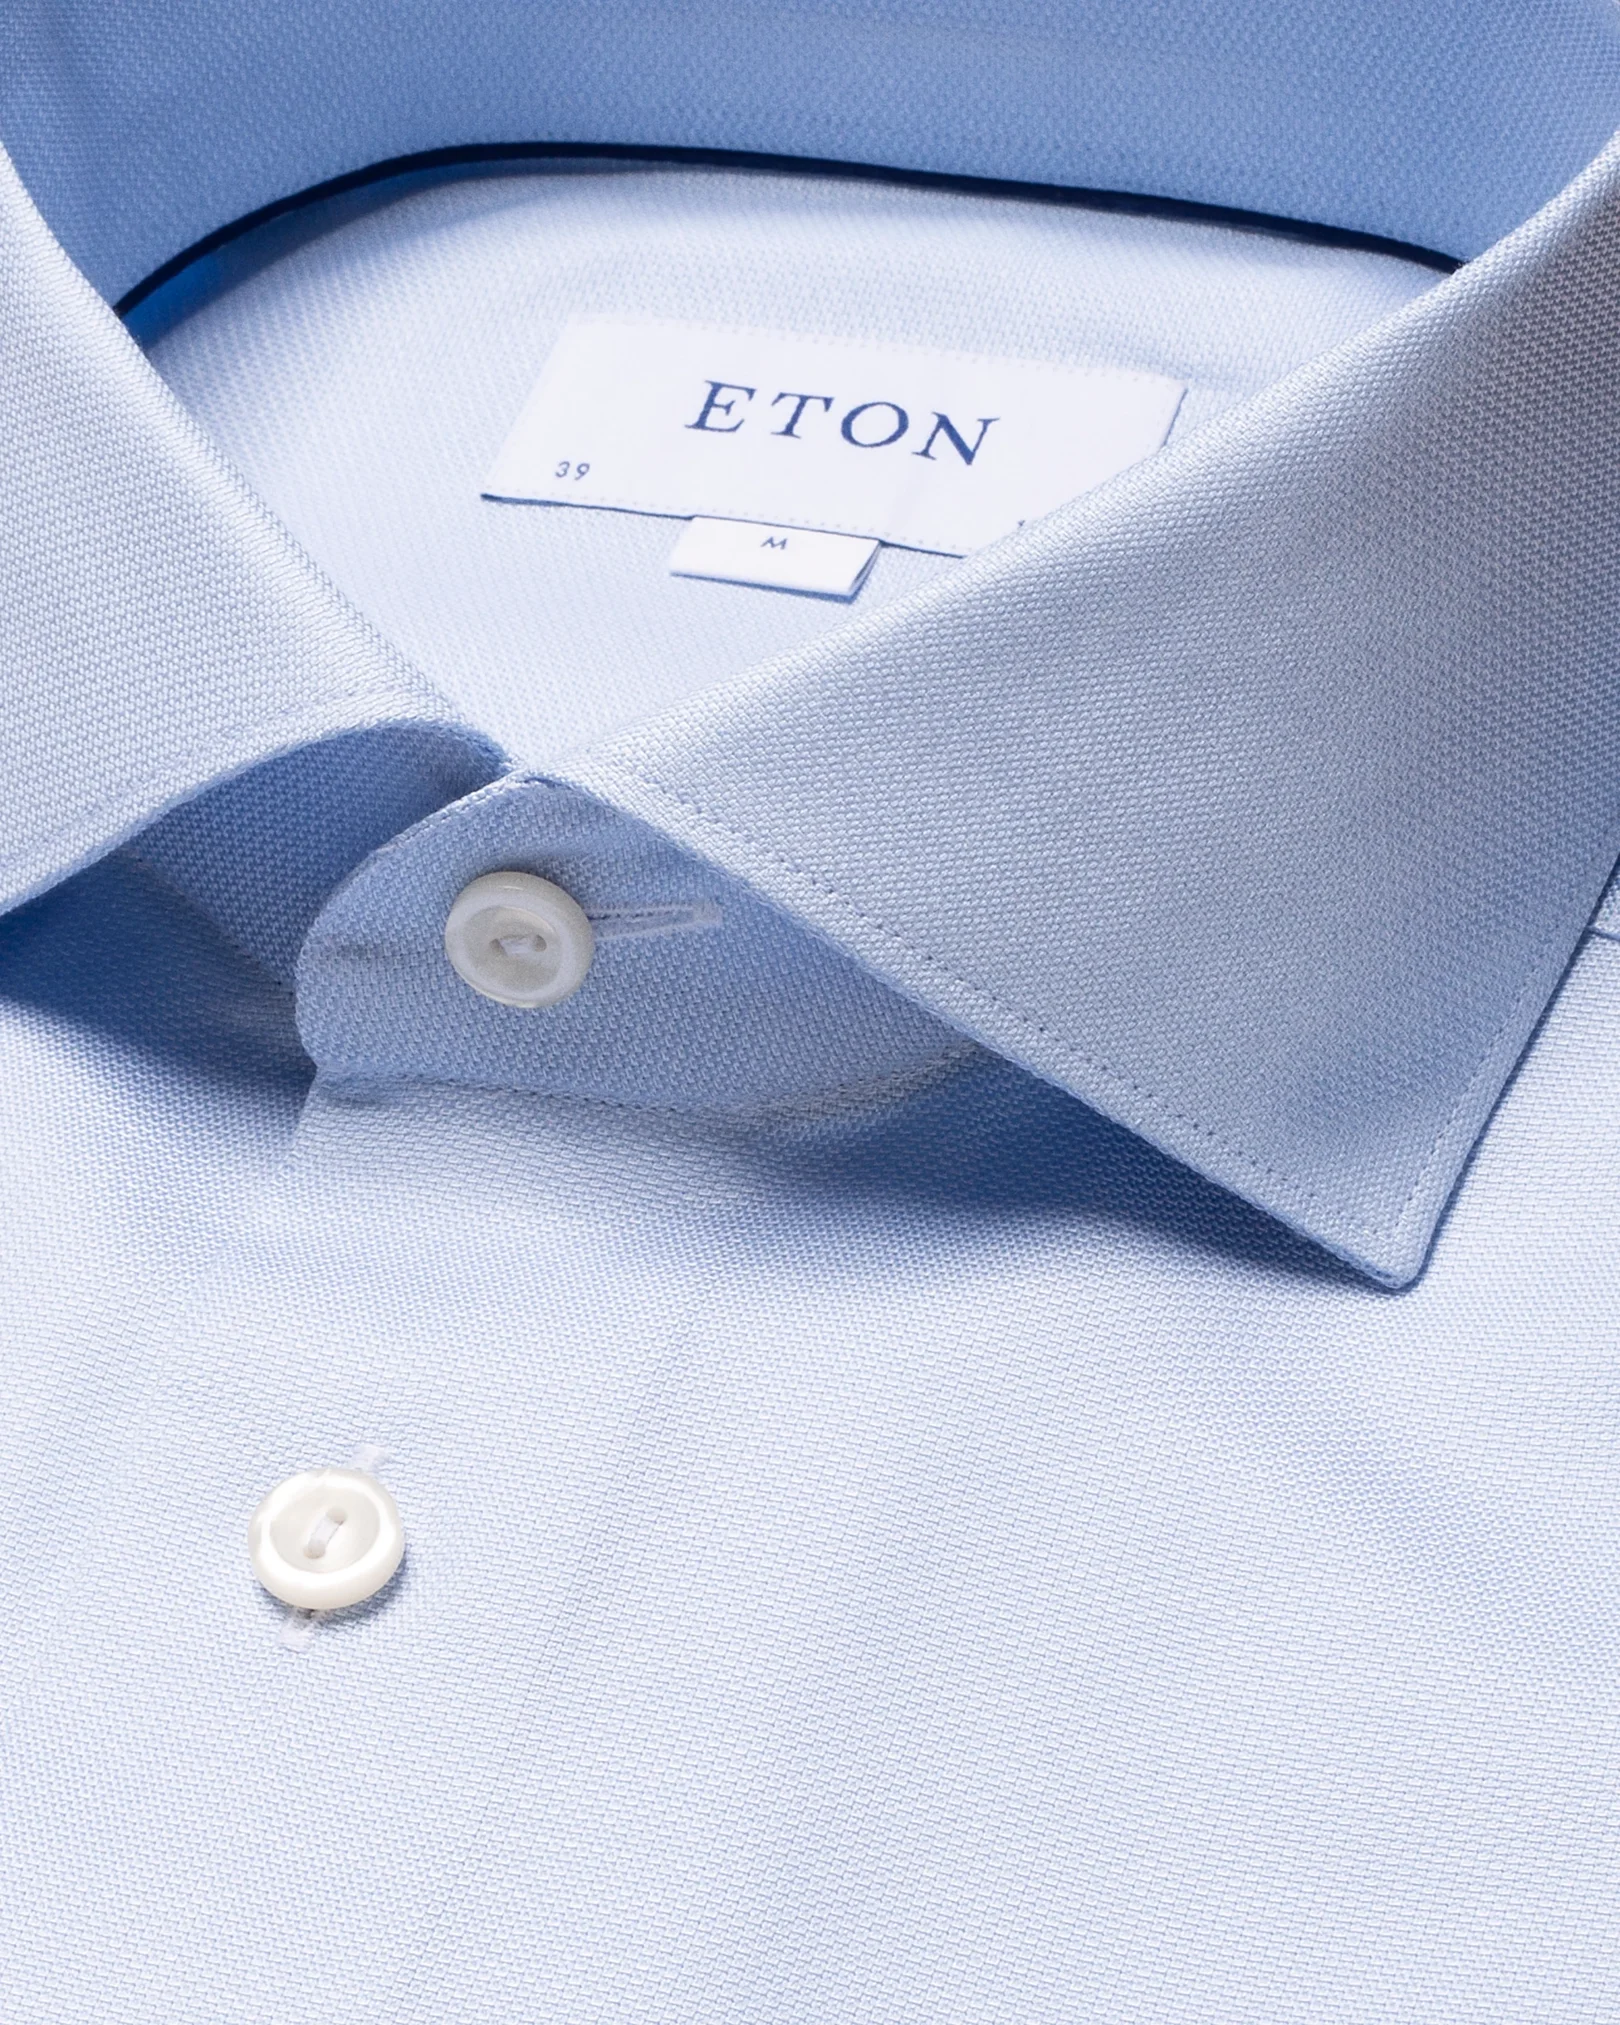 Eton - light blue cotton lyocell stretch wide spread rounded single one buttonhole slim